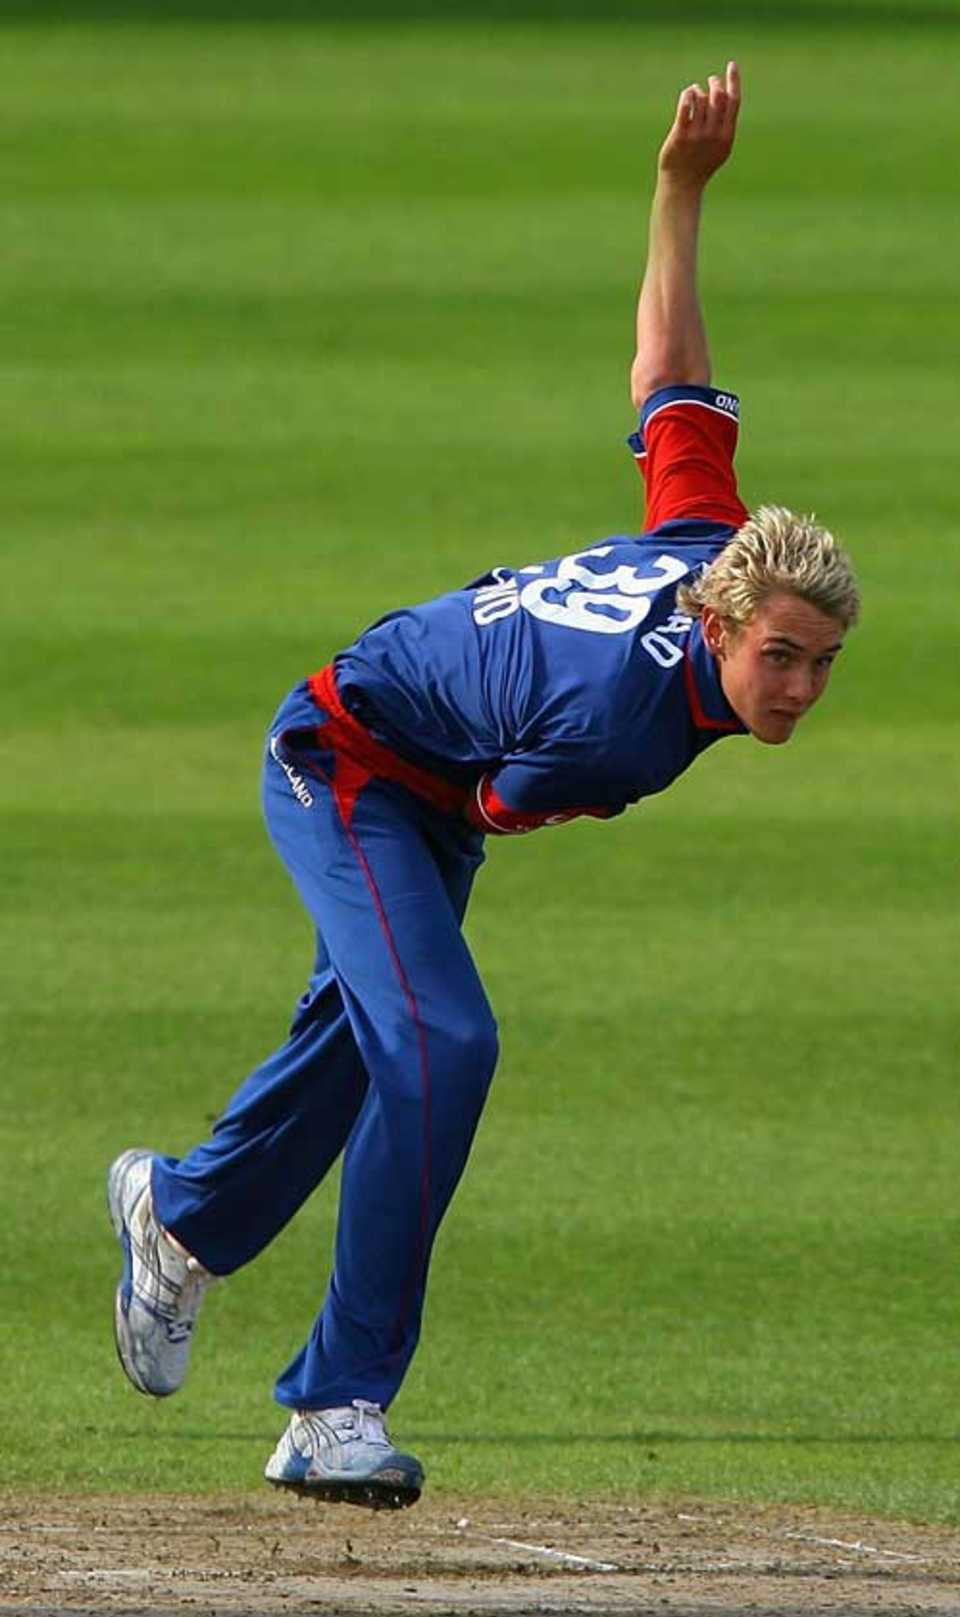 Stuart Broad was expensive against West Indies but collected a late wicket, England Lions v West Indians, New Road, June 21, 2007